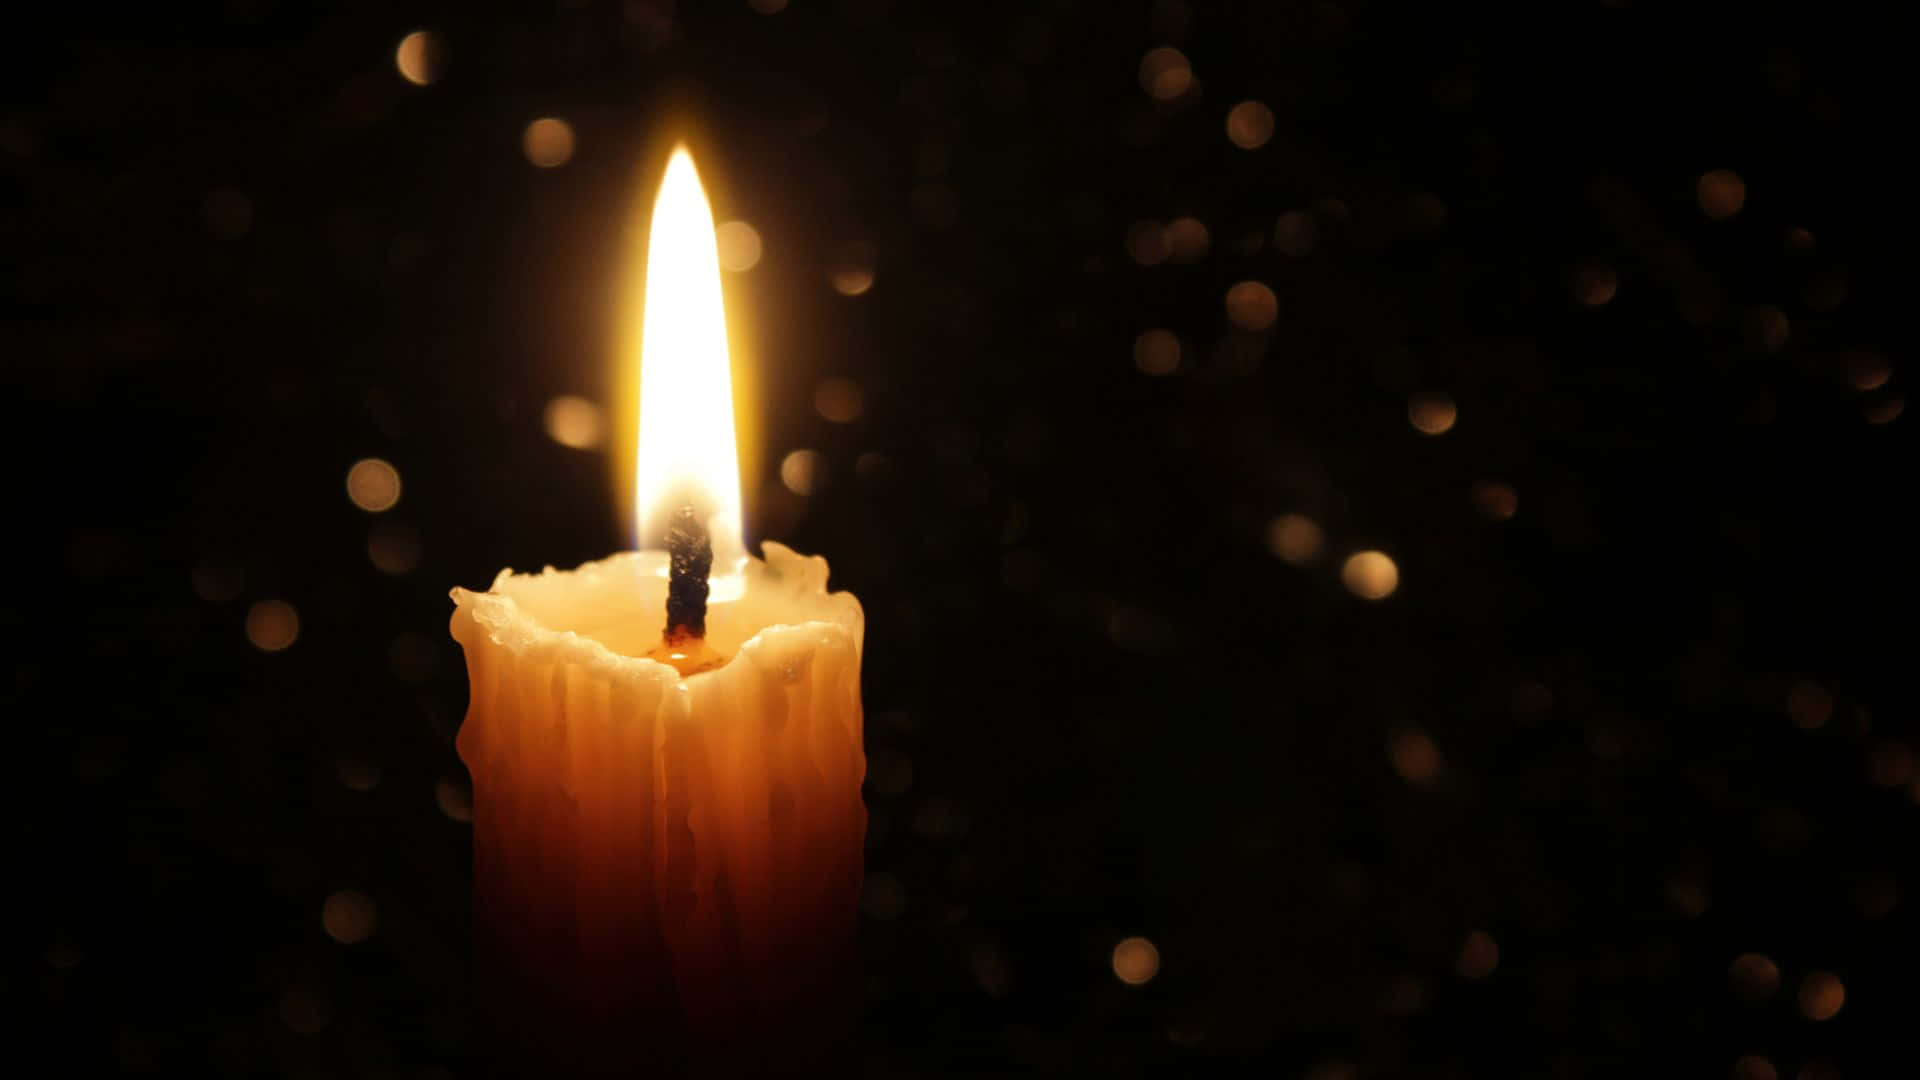 A Candle Lit In The Dark With A Black Background